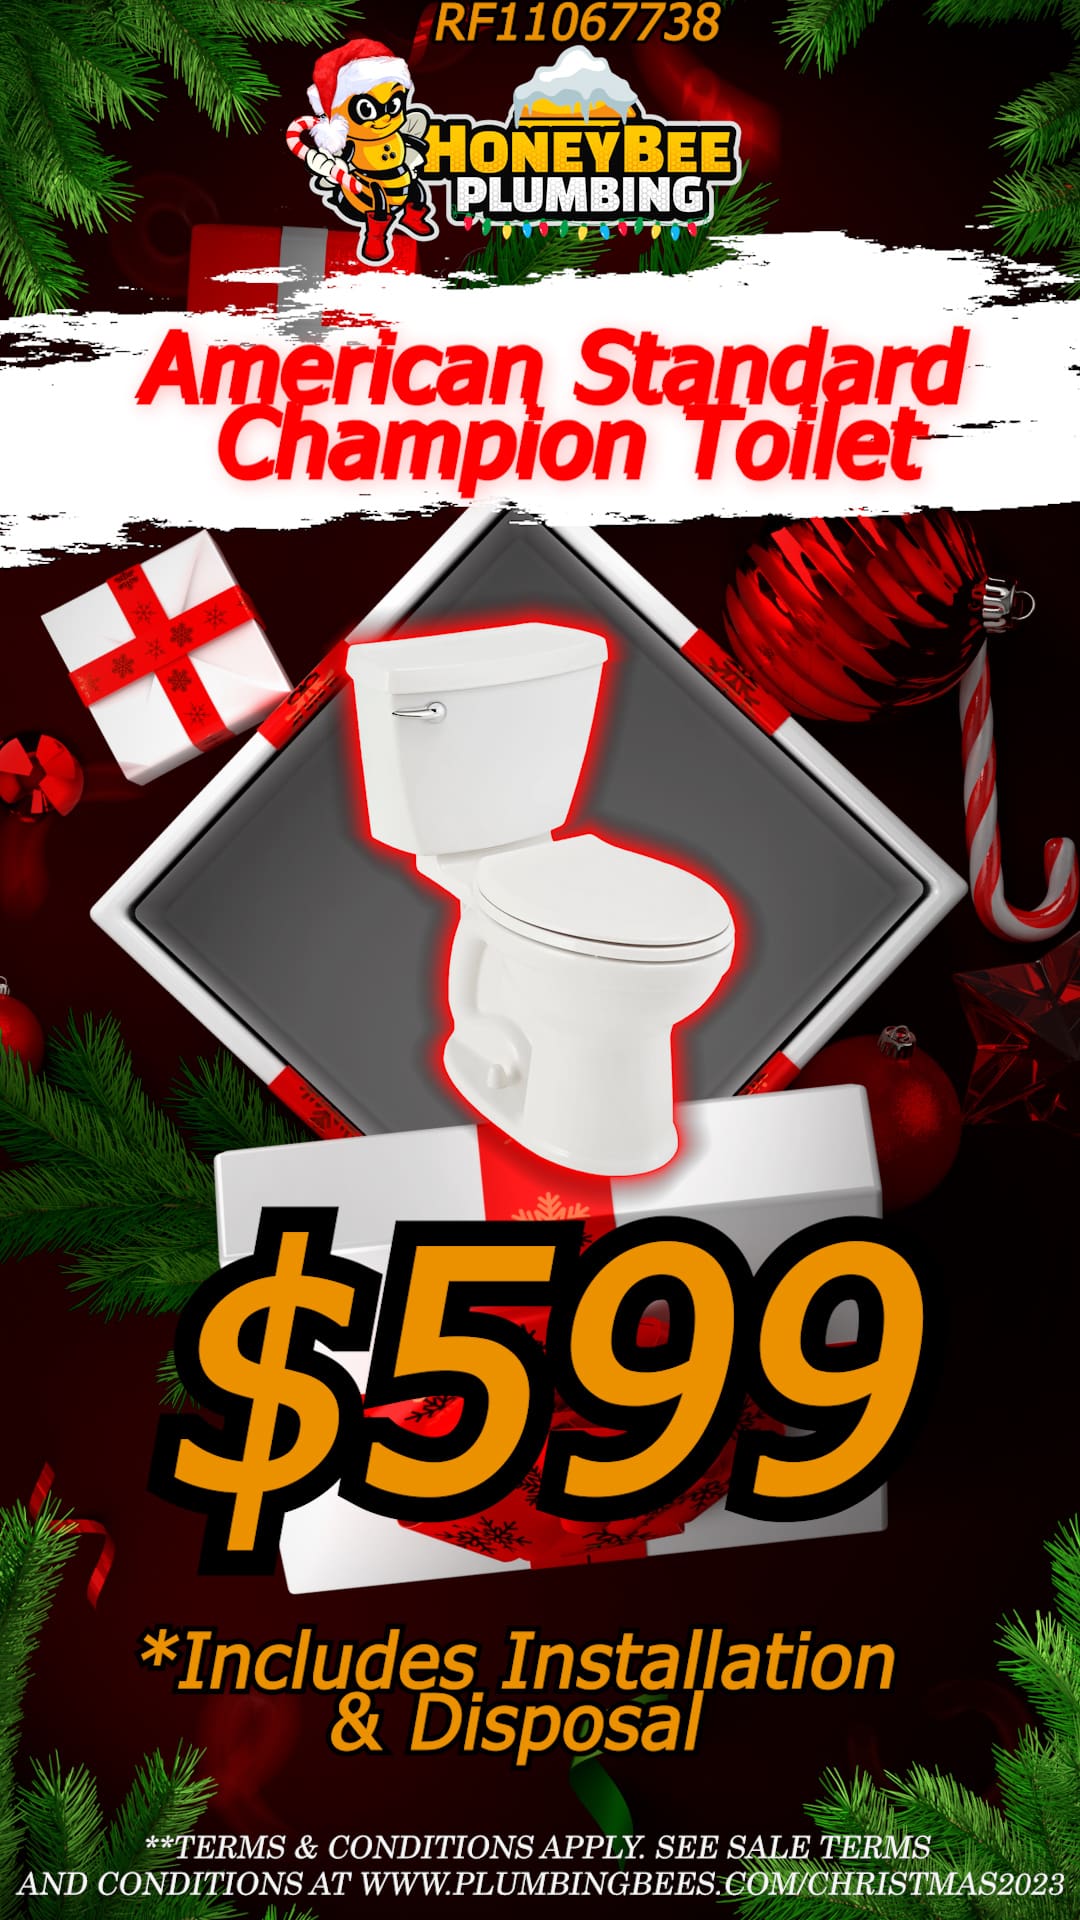 Advertisement showcasing Honey Bee Plumbing's Christmas 2023 special offer for an American Standard Champion toilet installation at 9. The image features the toilet model prominently against a festive background adorned with Christmas decorations like garlands and snowflakes, and a color scheme of red, green, and white. The Honey Bee Plumbing logo is prominently displayed, enhancing the holiday theme of the advertisement.